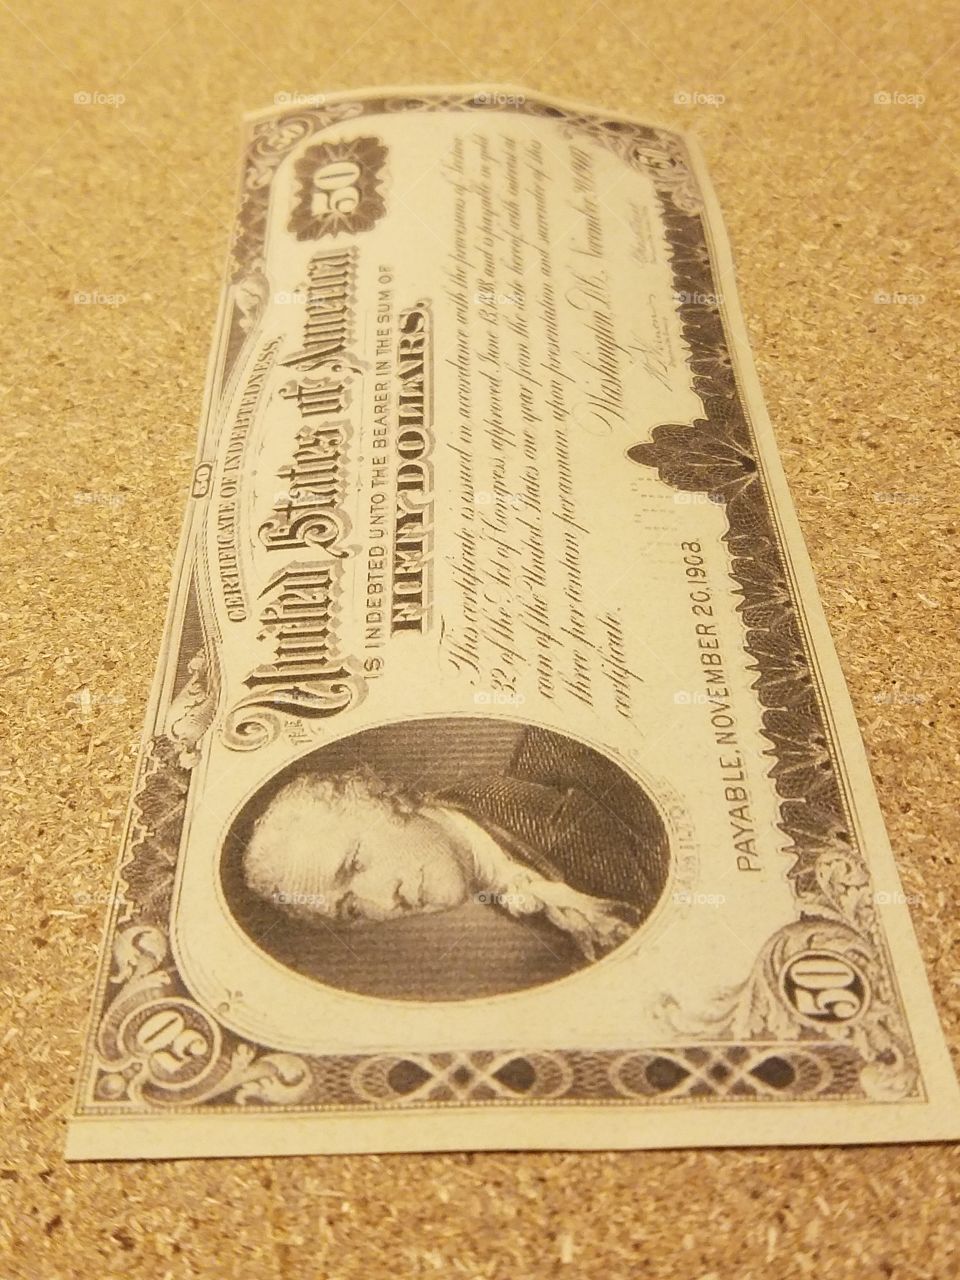 Treasury Note (19th century)

A proof of a $50 Certificate of Indebtedness of the type issued during the Panic of 1907